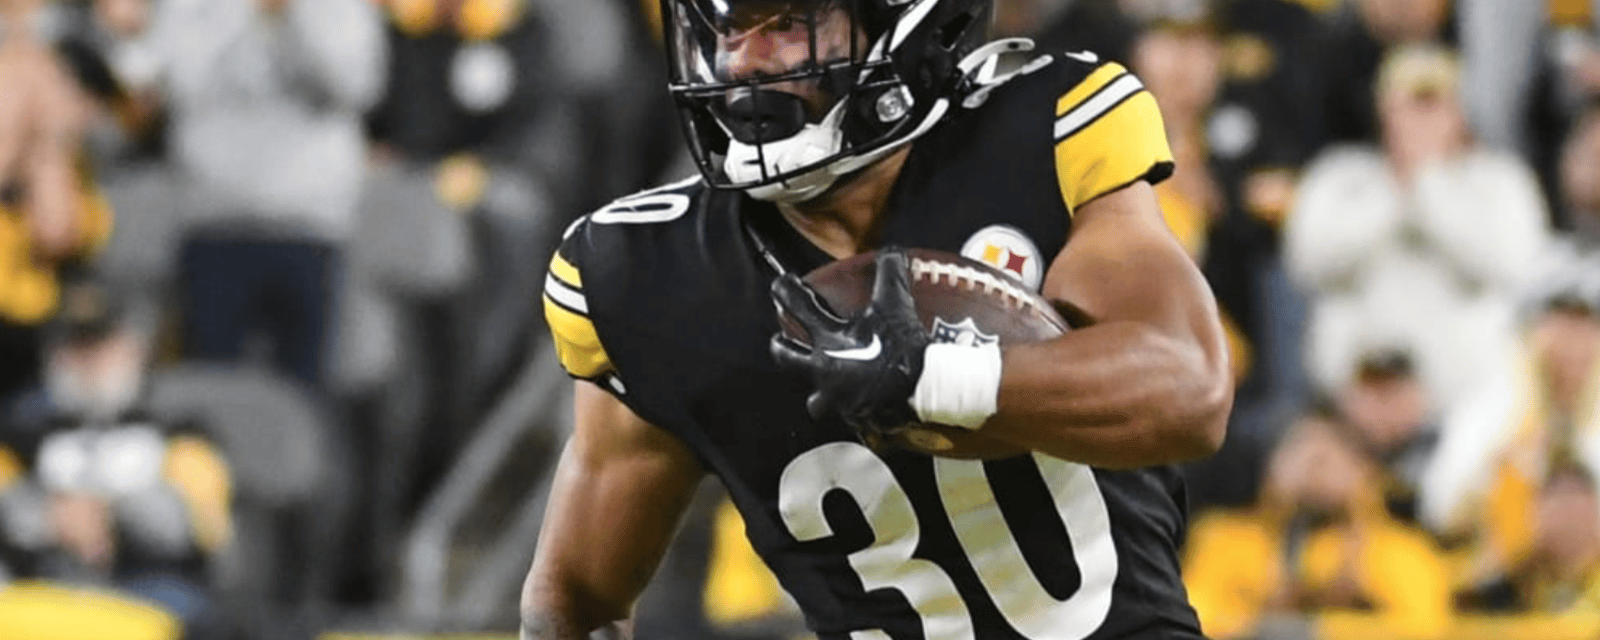 NFL drops hammer on multiple Steelers players!